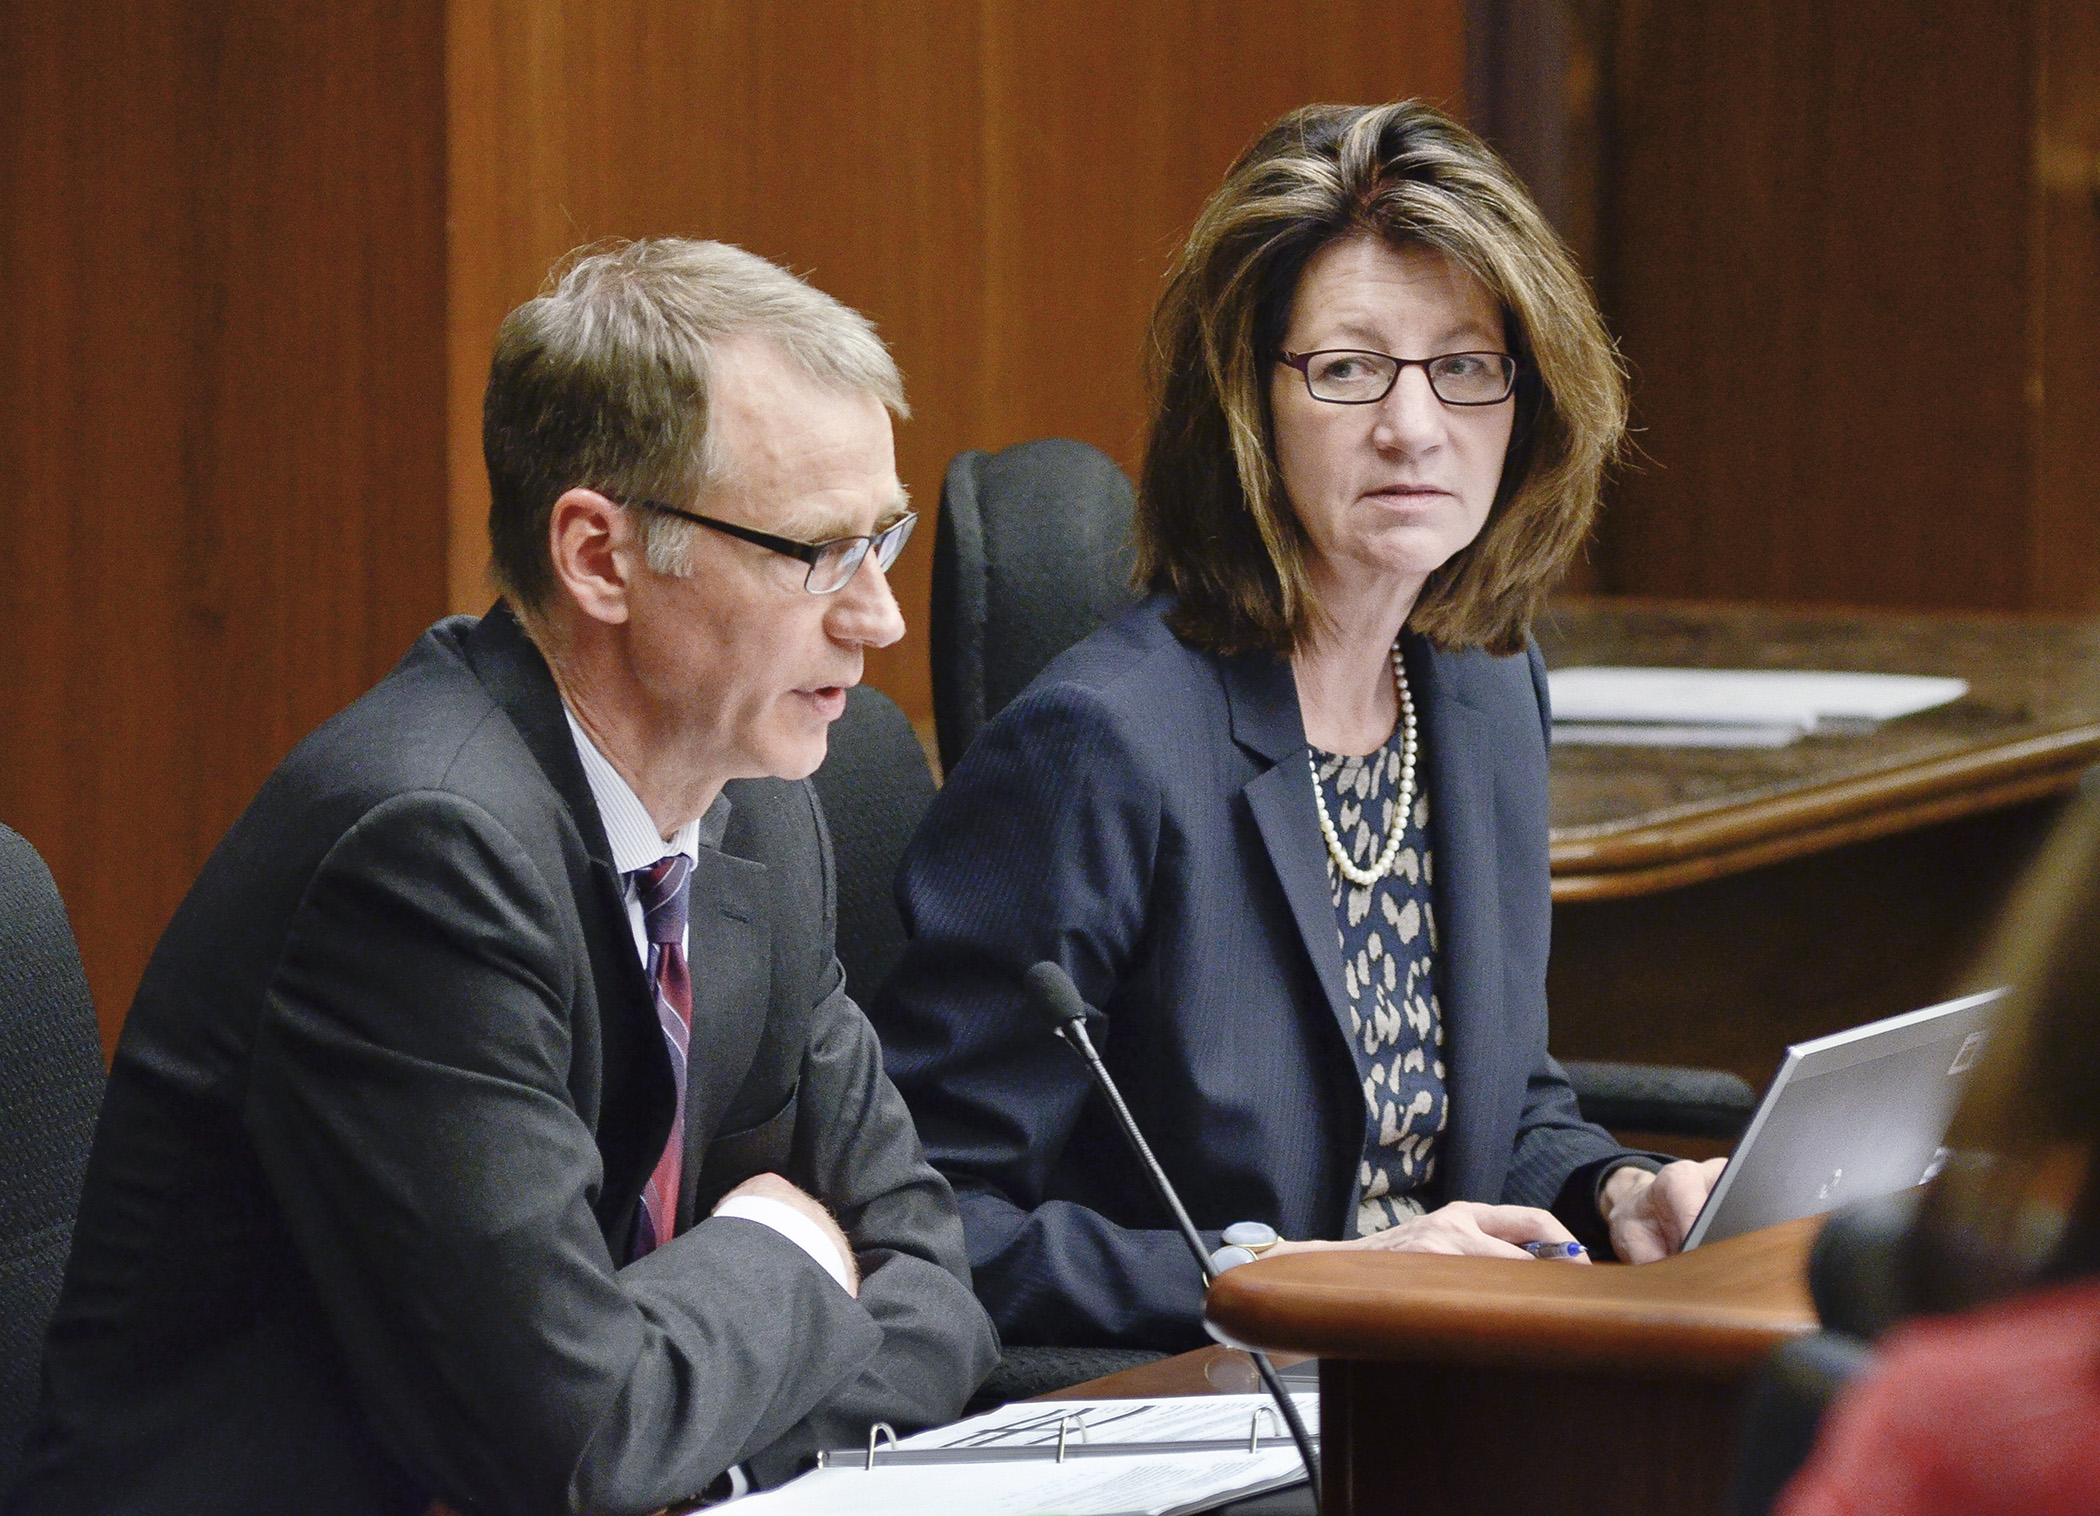 Deputy Human Services Commissioner Chuck Johnson, left, and Commissioner Lucinda Jesson present an overview of the governor’s biennial budget proposal for the Department of Human Services to members of the House Health and Human Services Finance Committee Jan. 29. Photo by Andrew VonBank